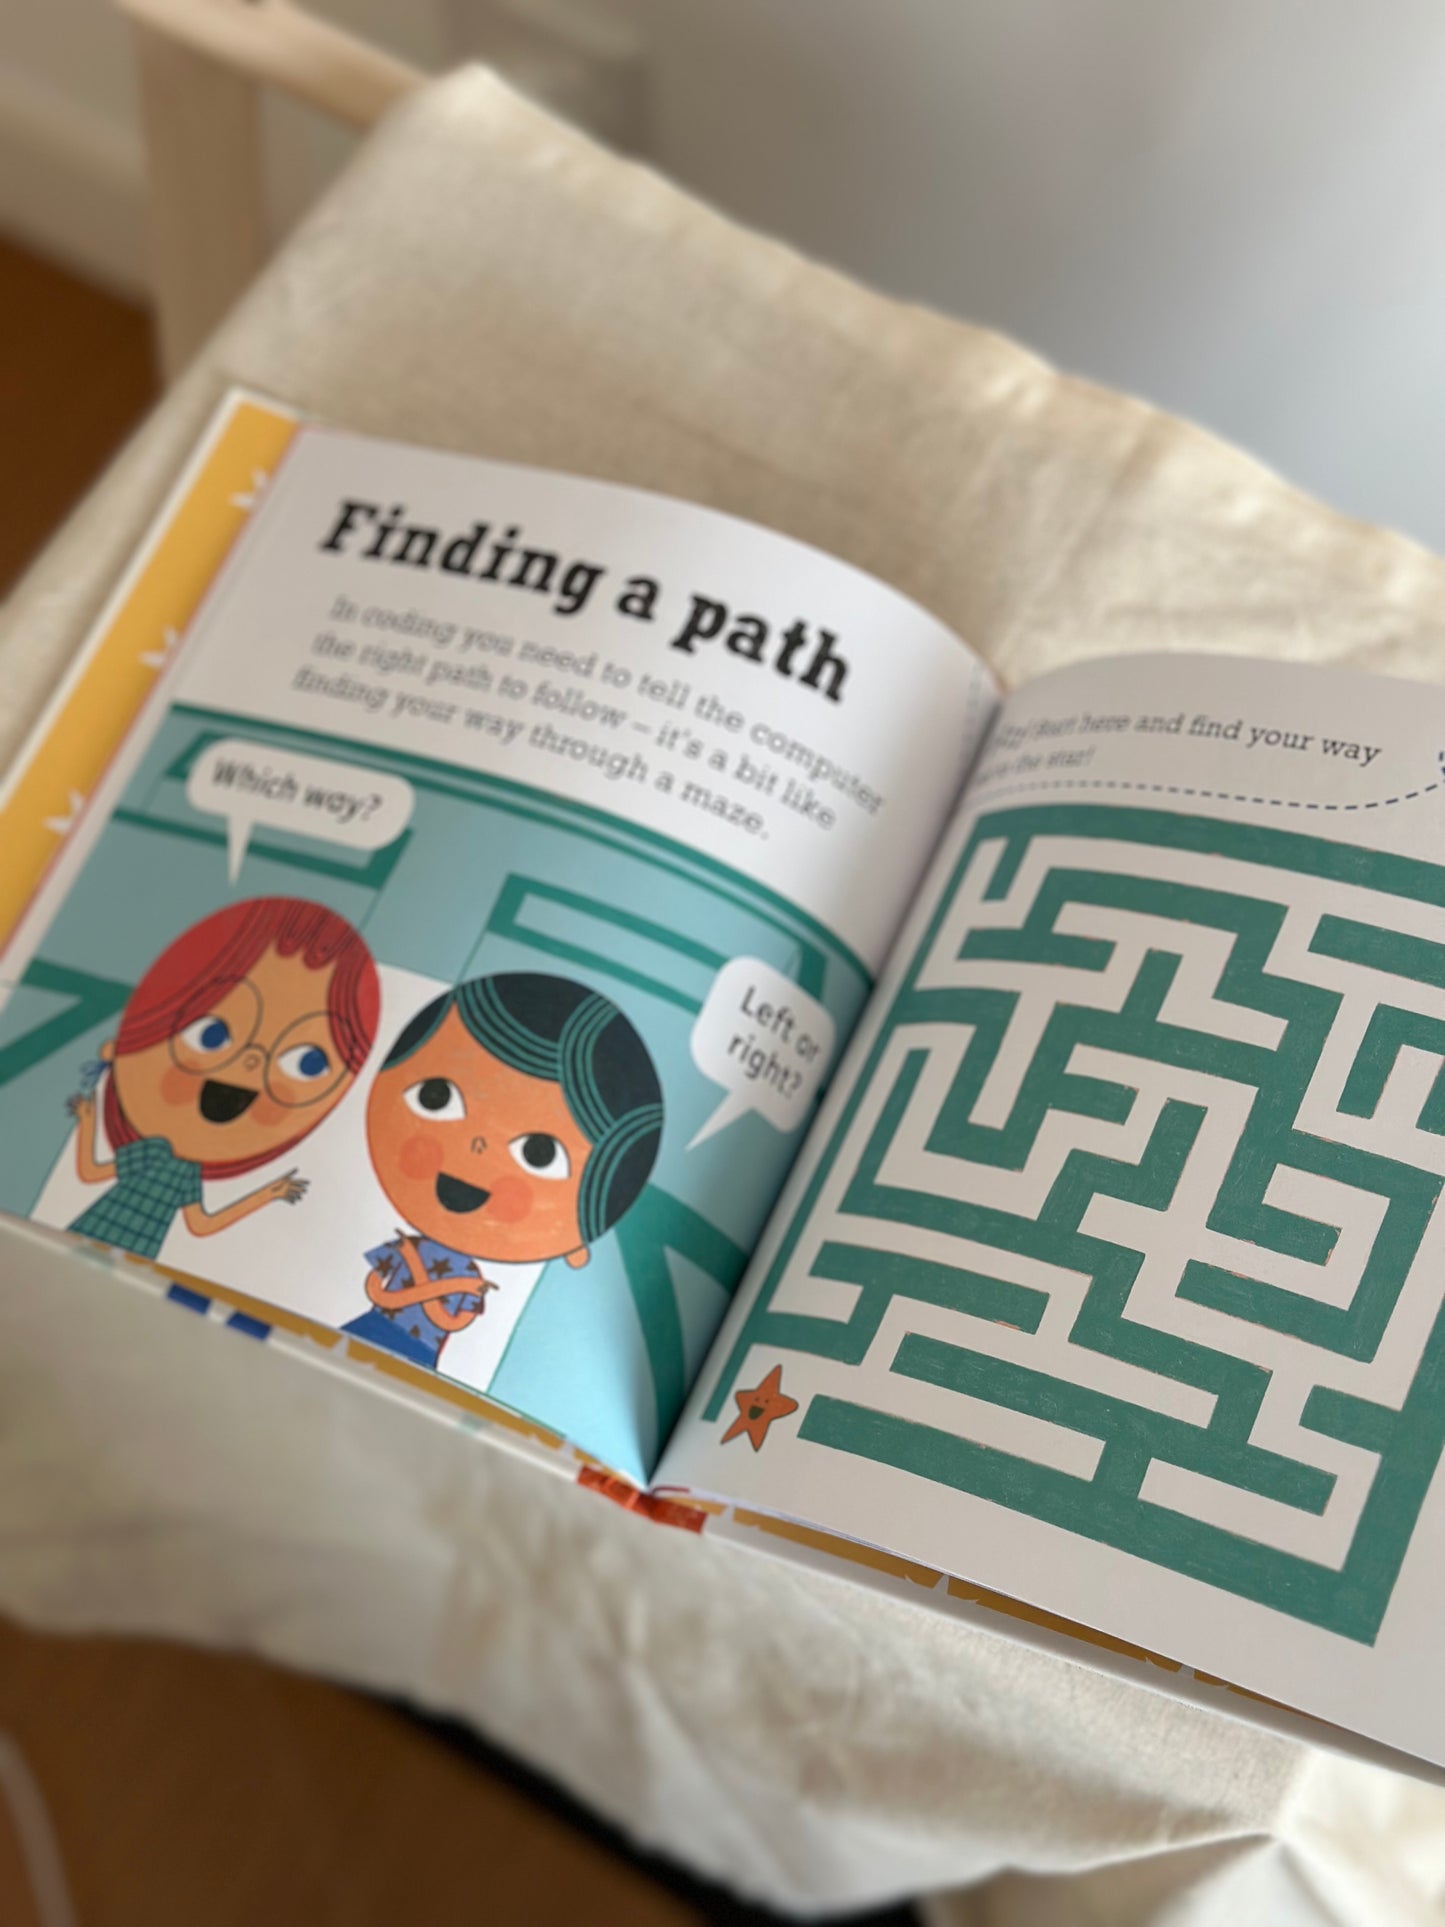 Science Words for Little People: Coding [Book]